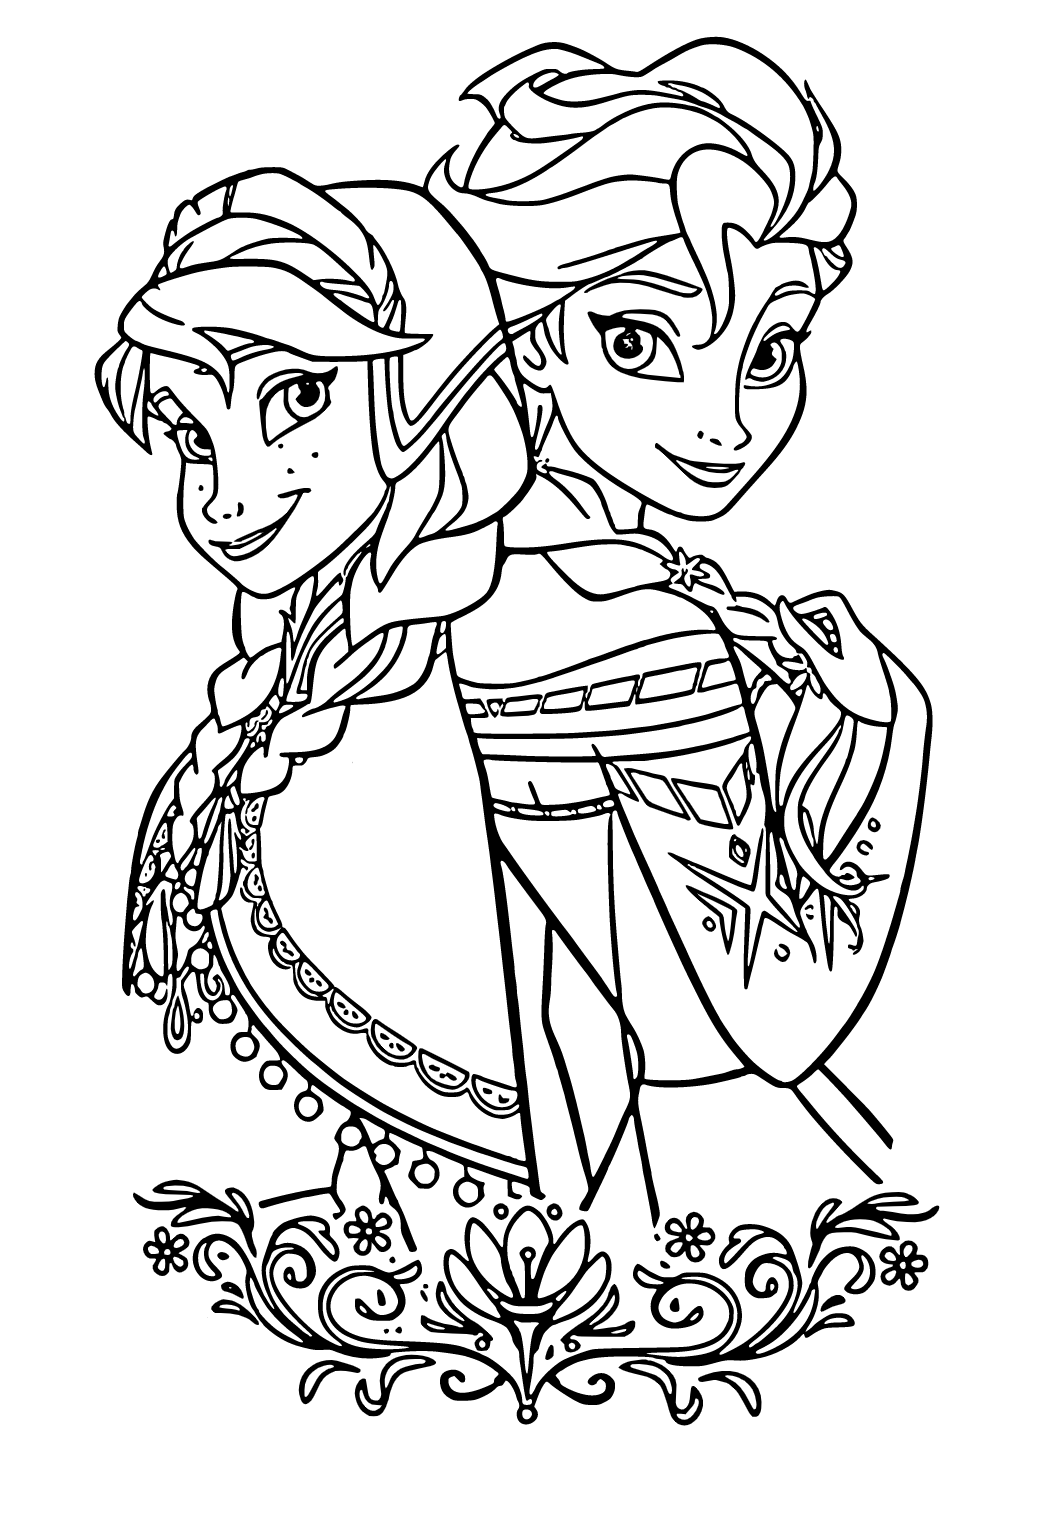 frozen easter coloring pages